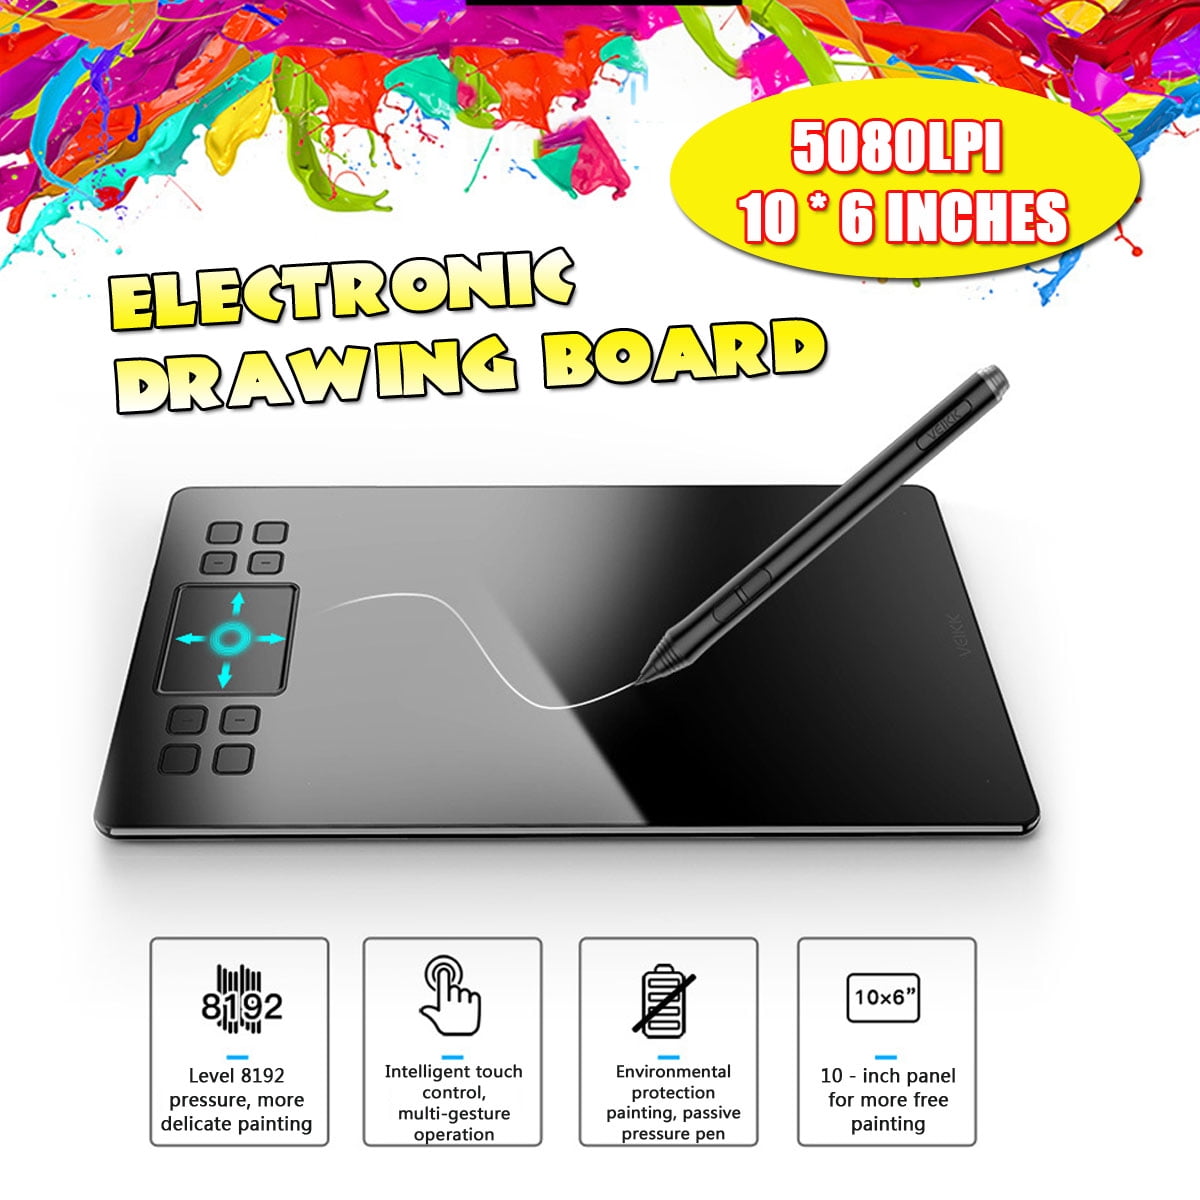 VEIKK A50 Graphics Drawing Tablet with 8192 Pressure SensitivityBattery-Free Pen 